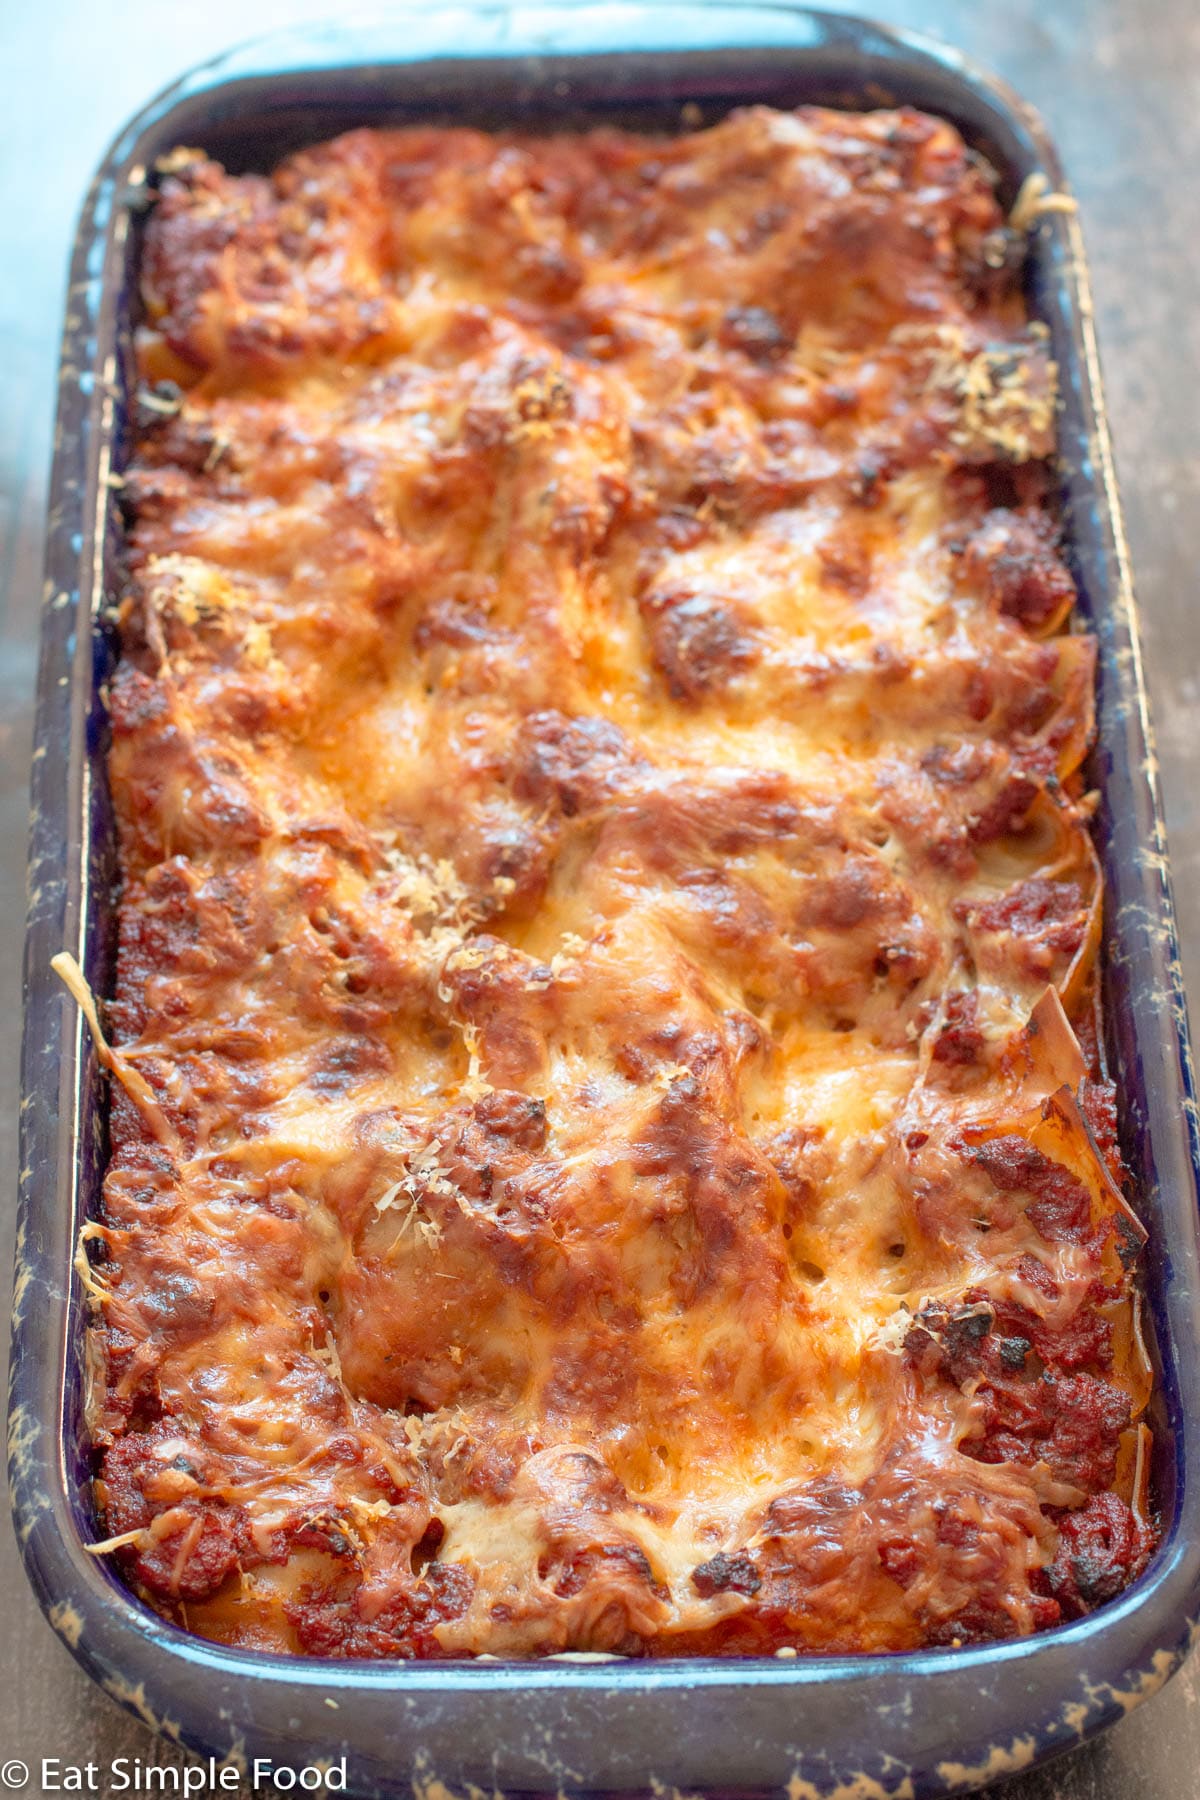 Beef and Sausage Lasagna cooked layered with melted mozzarella and Parmesan cheese in a rectangle blue baking dish.